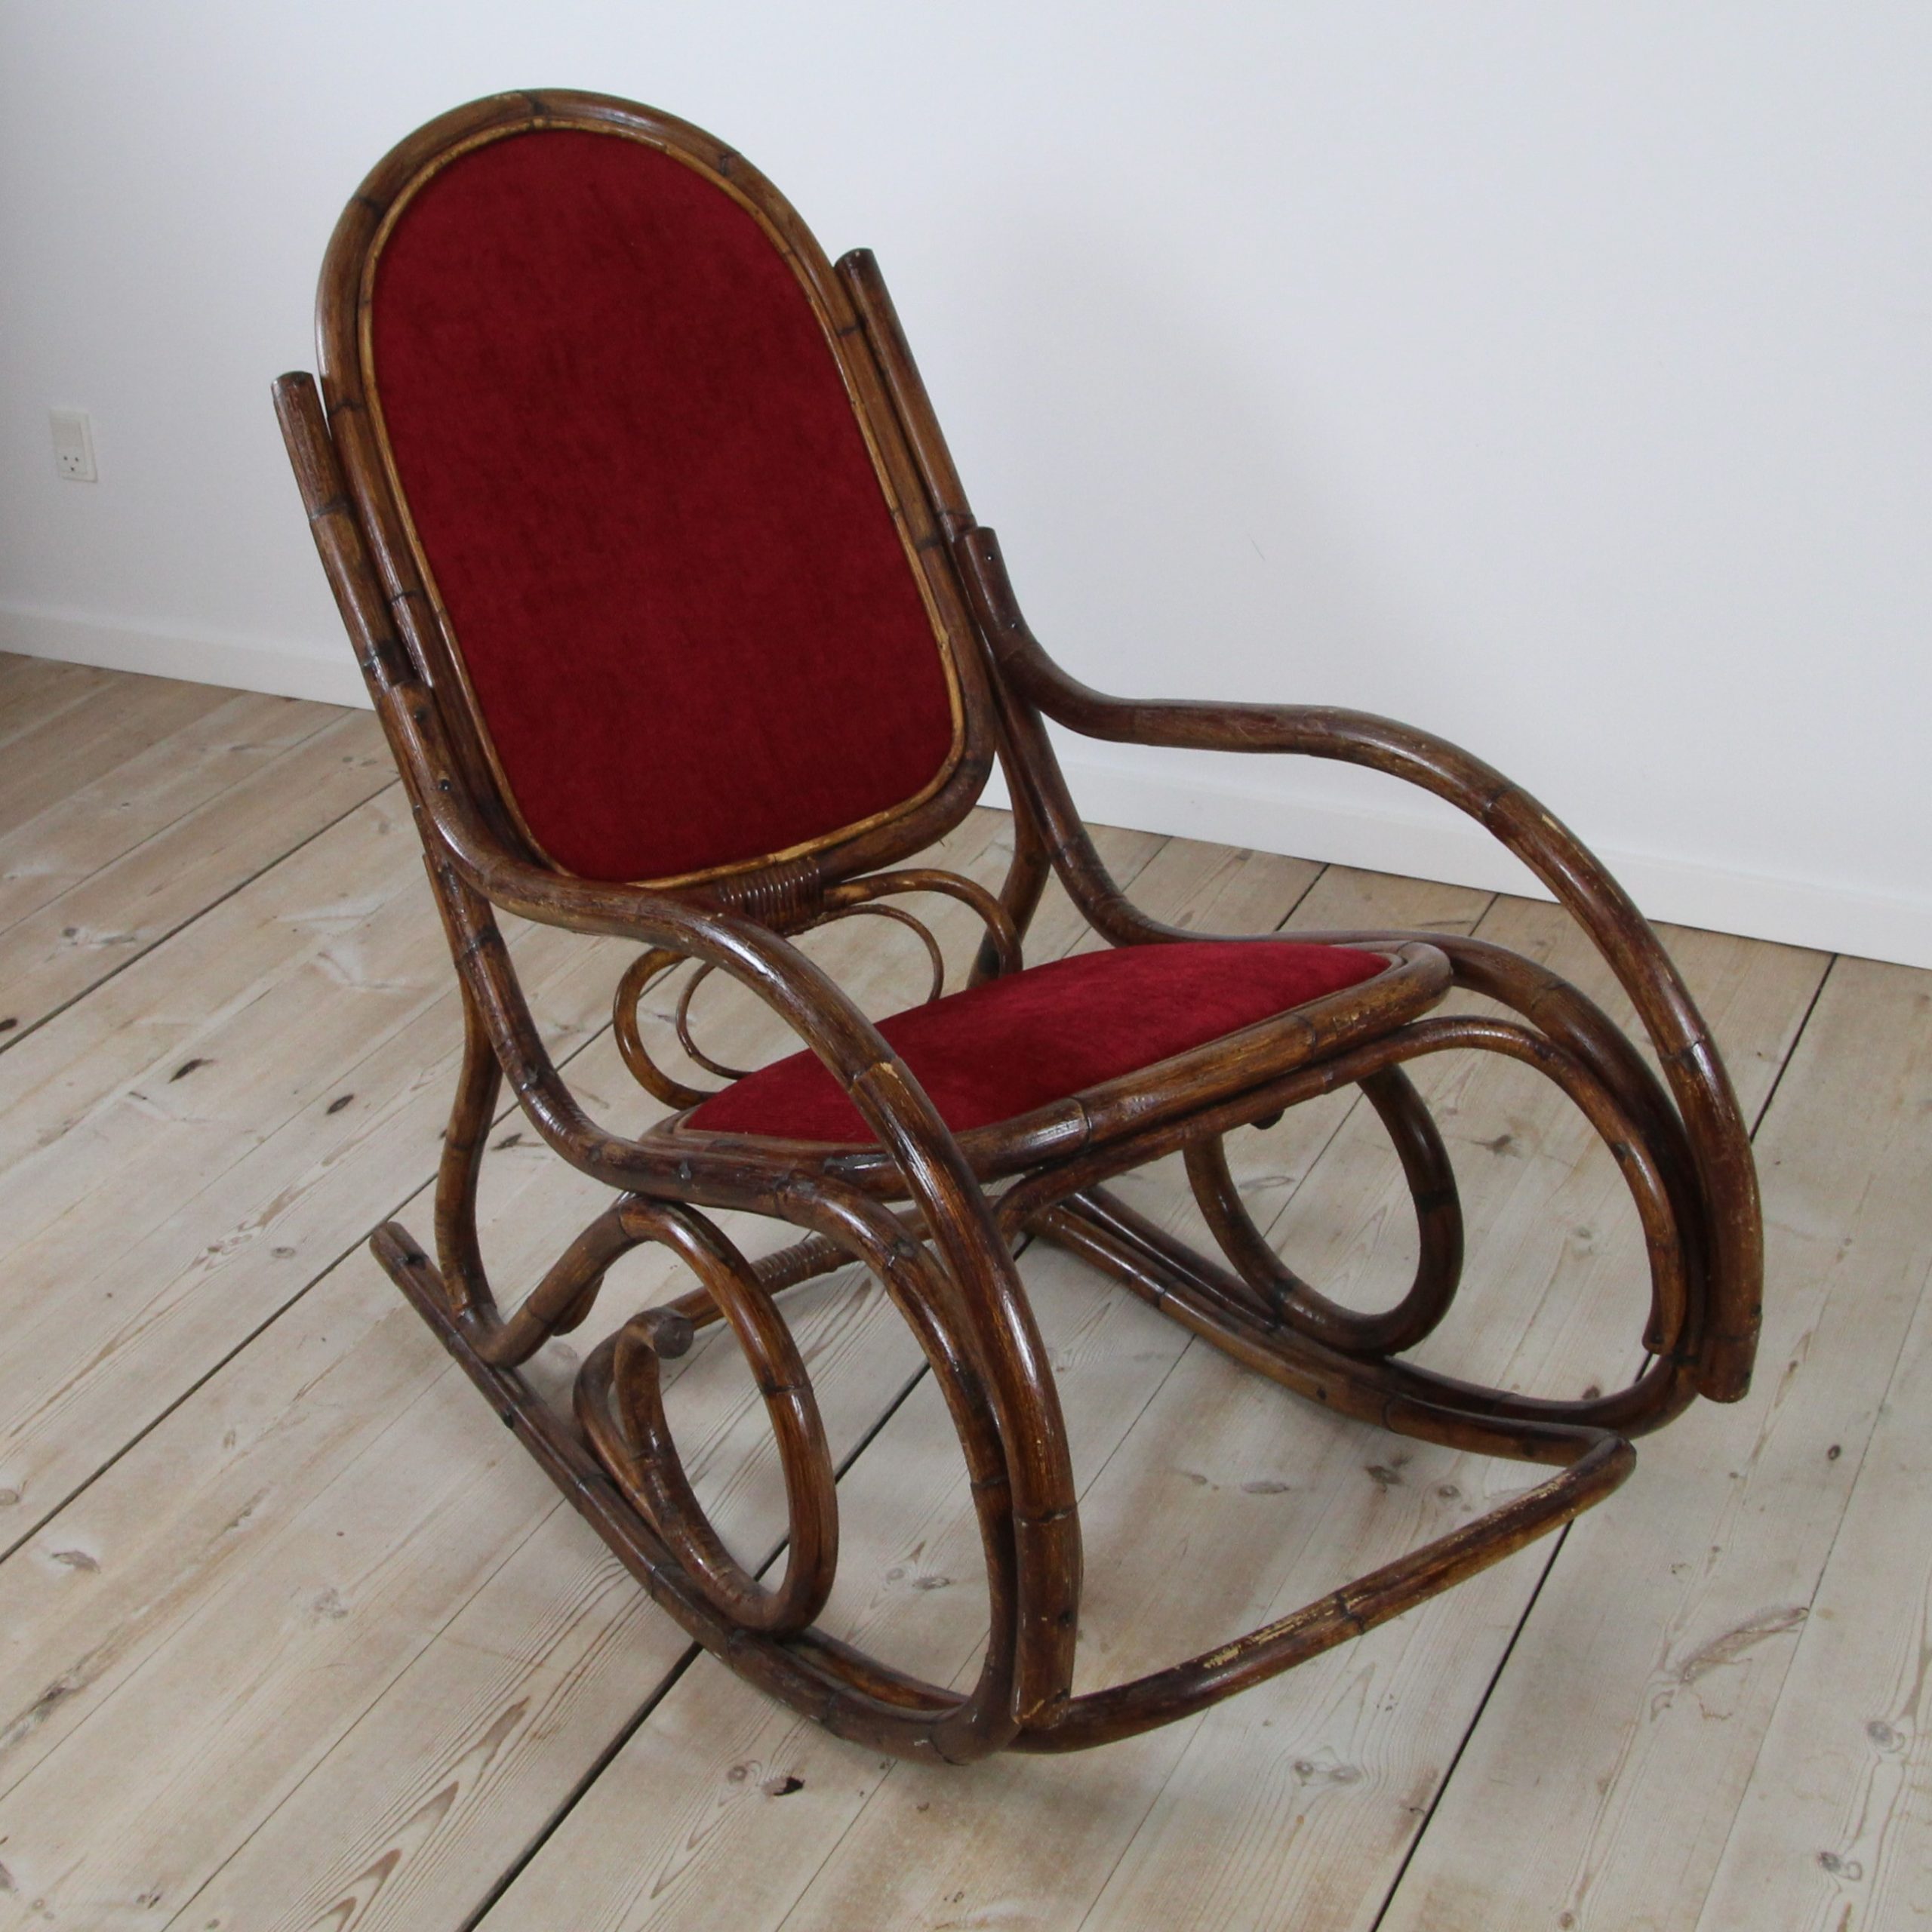 Vintage rocking chair in the manner of Thonet, c.1900-1920’s